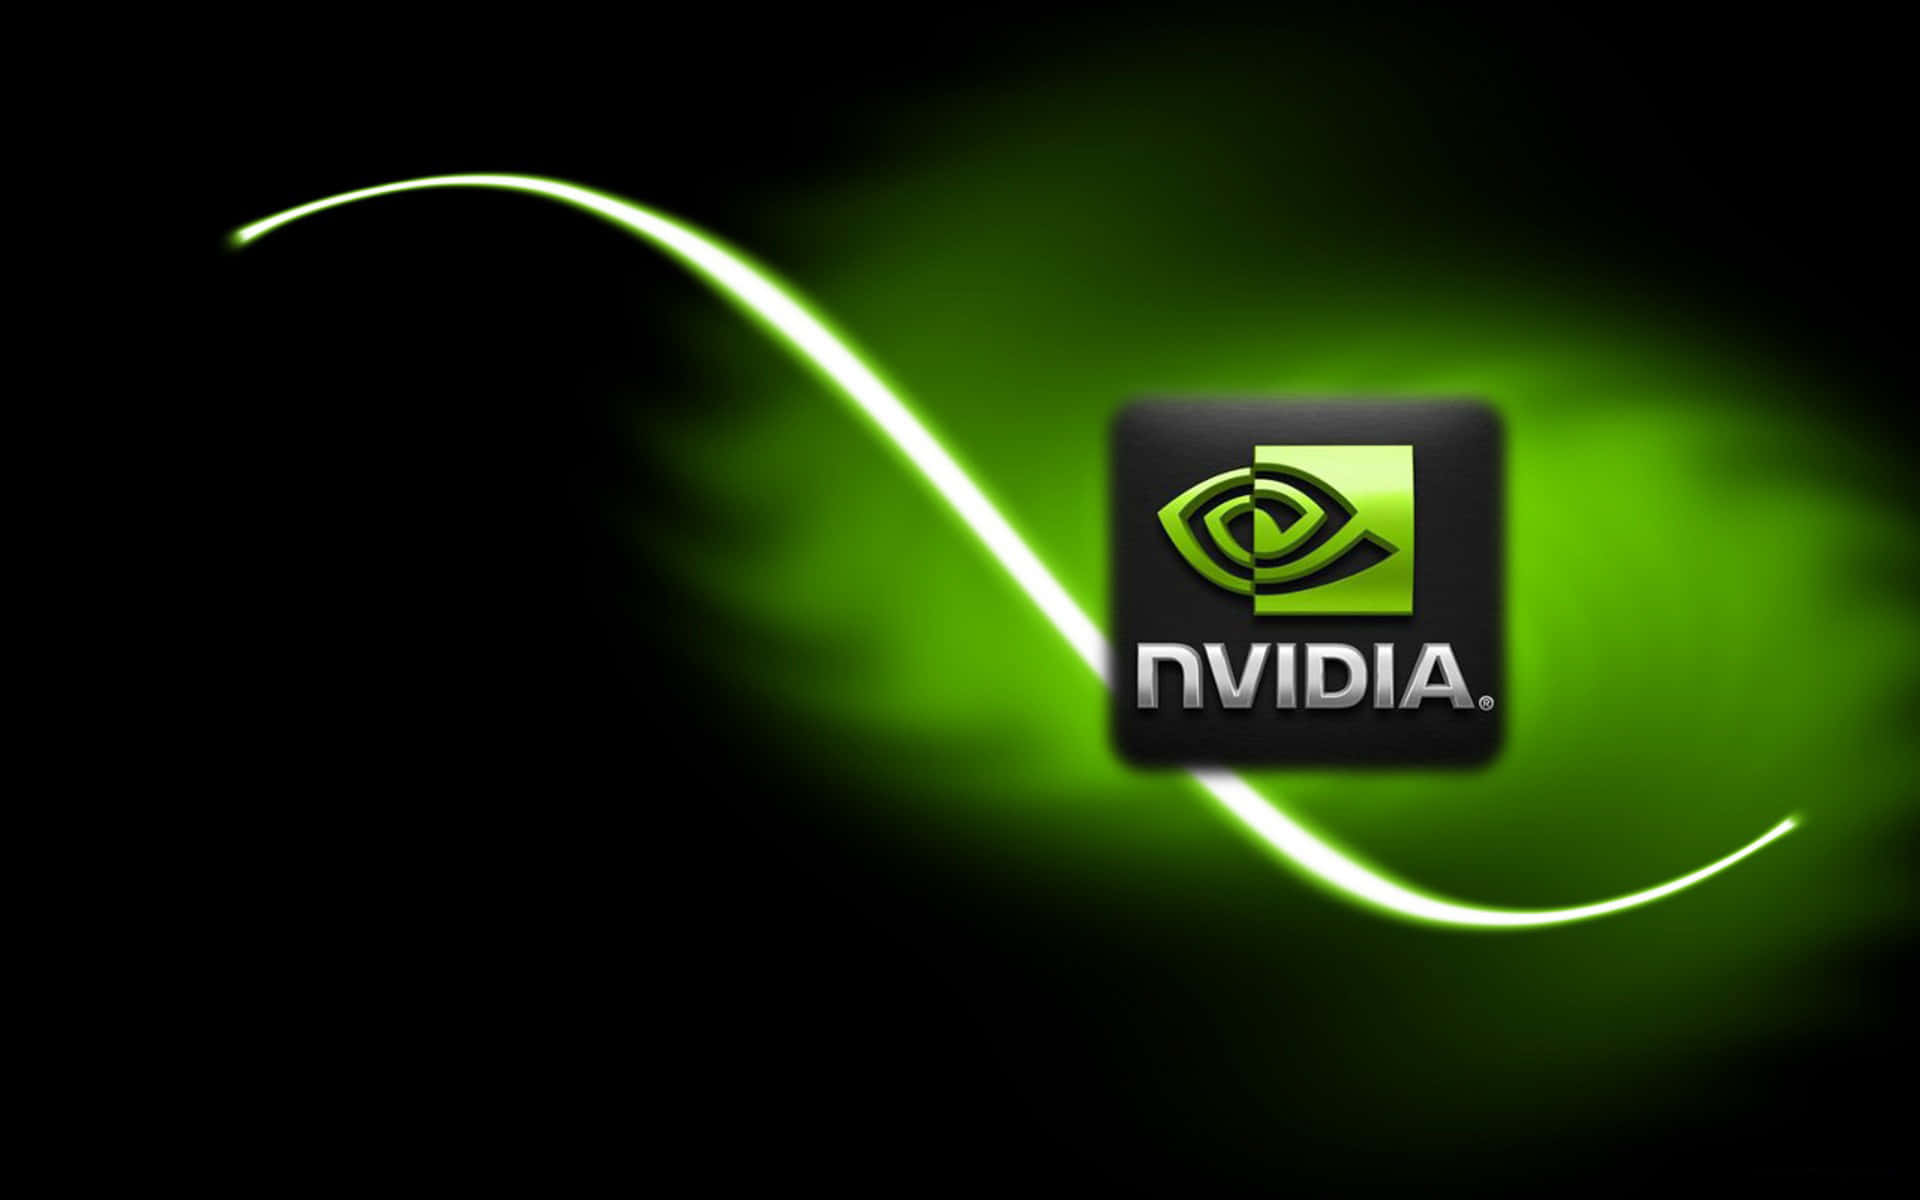 NVIDIA GeForce – Get an Edge in Gaming and Beyond